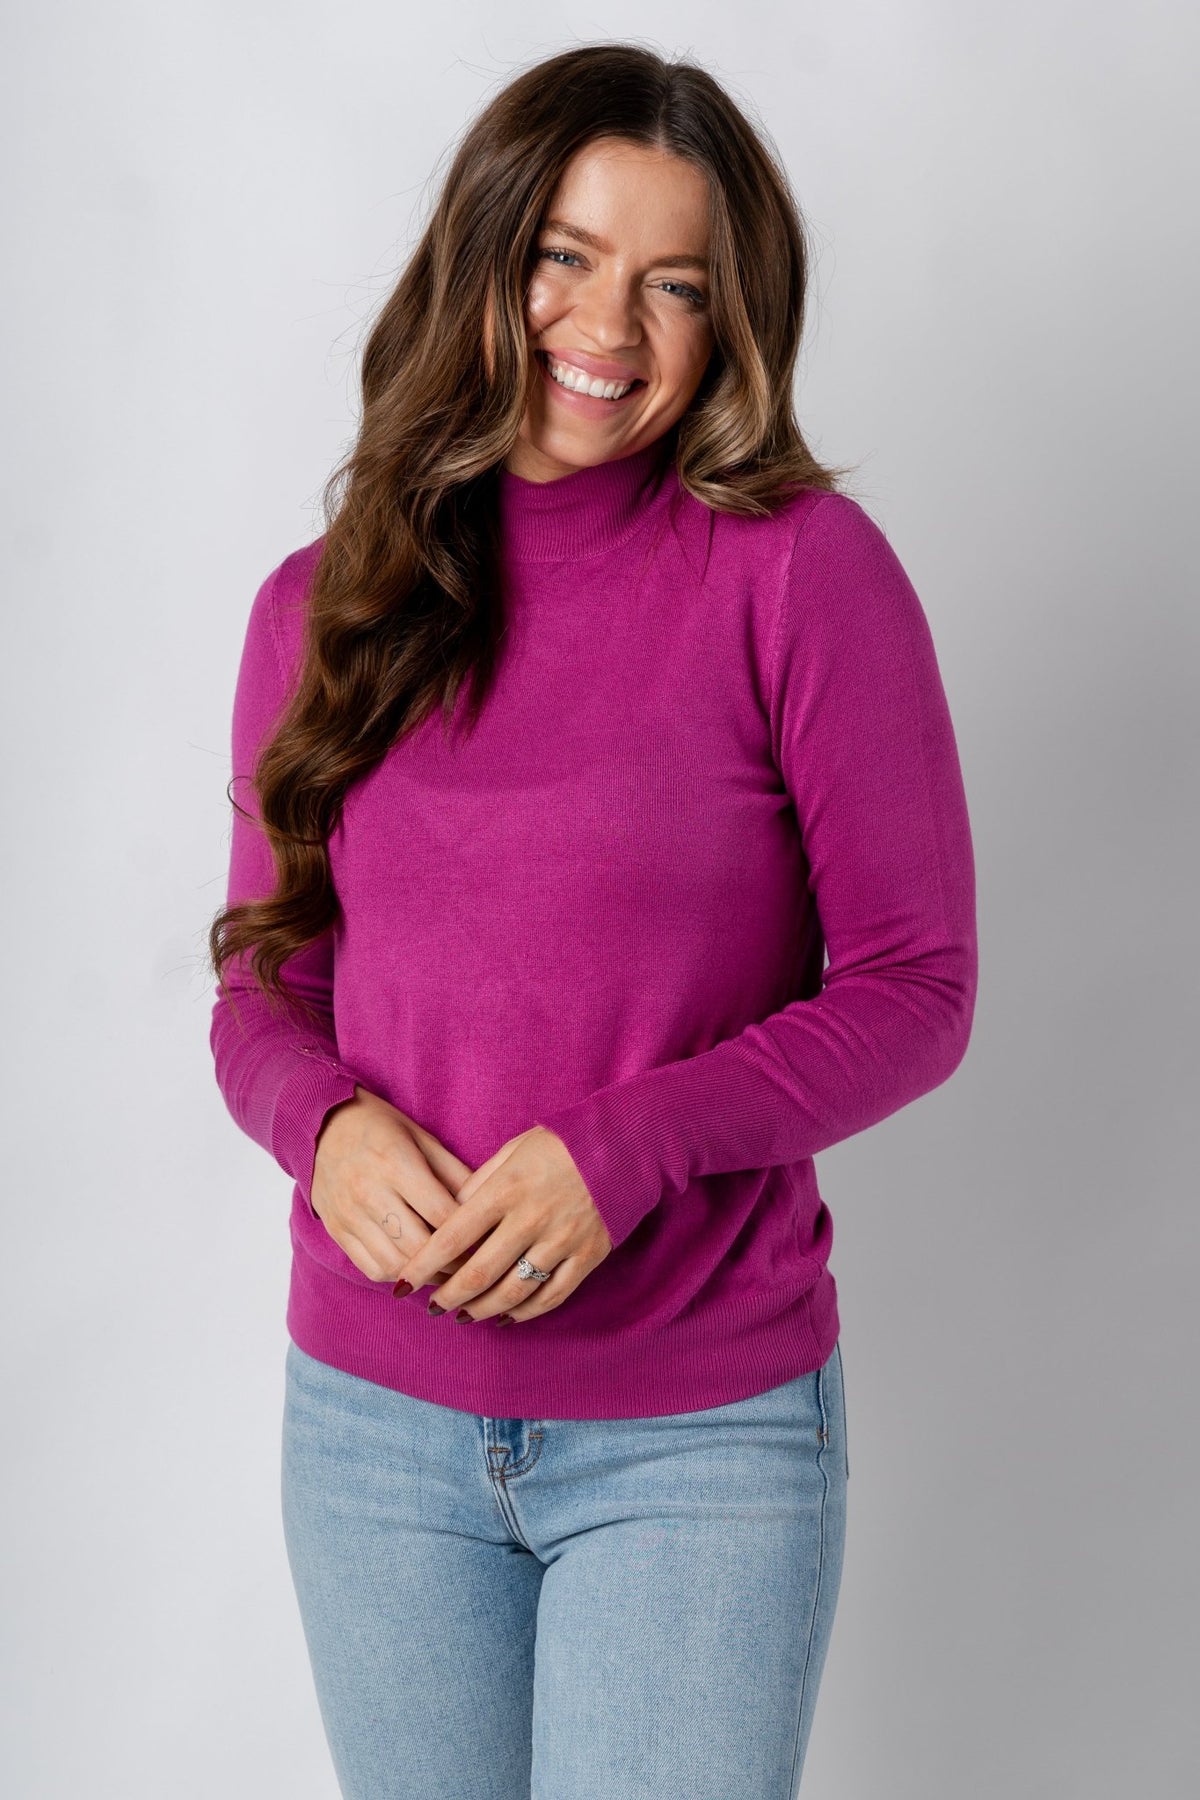 Mock neck long sleeve sweater magenta – Boutique Sweaters | Fashionable Sweaters at Lush Fashion Lounge Boutique in Oklahoma City